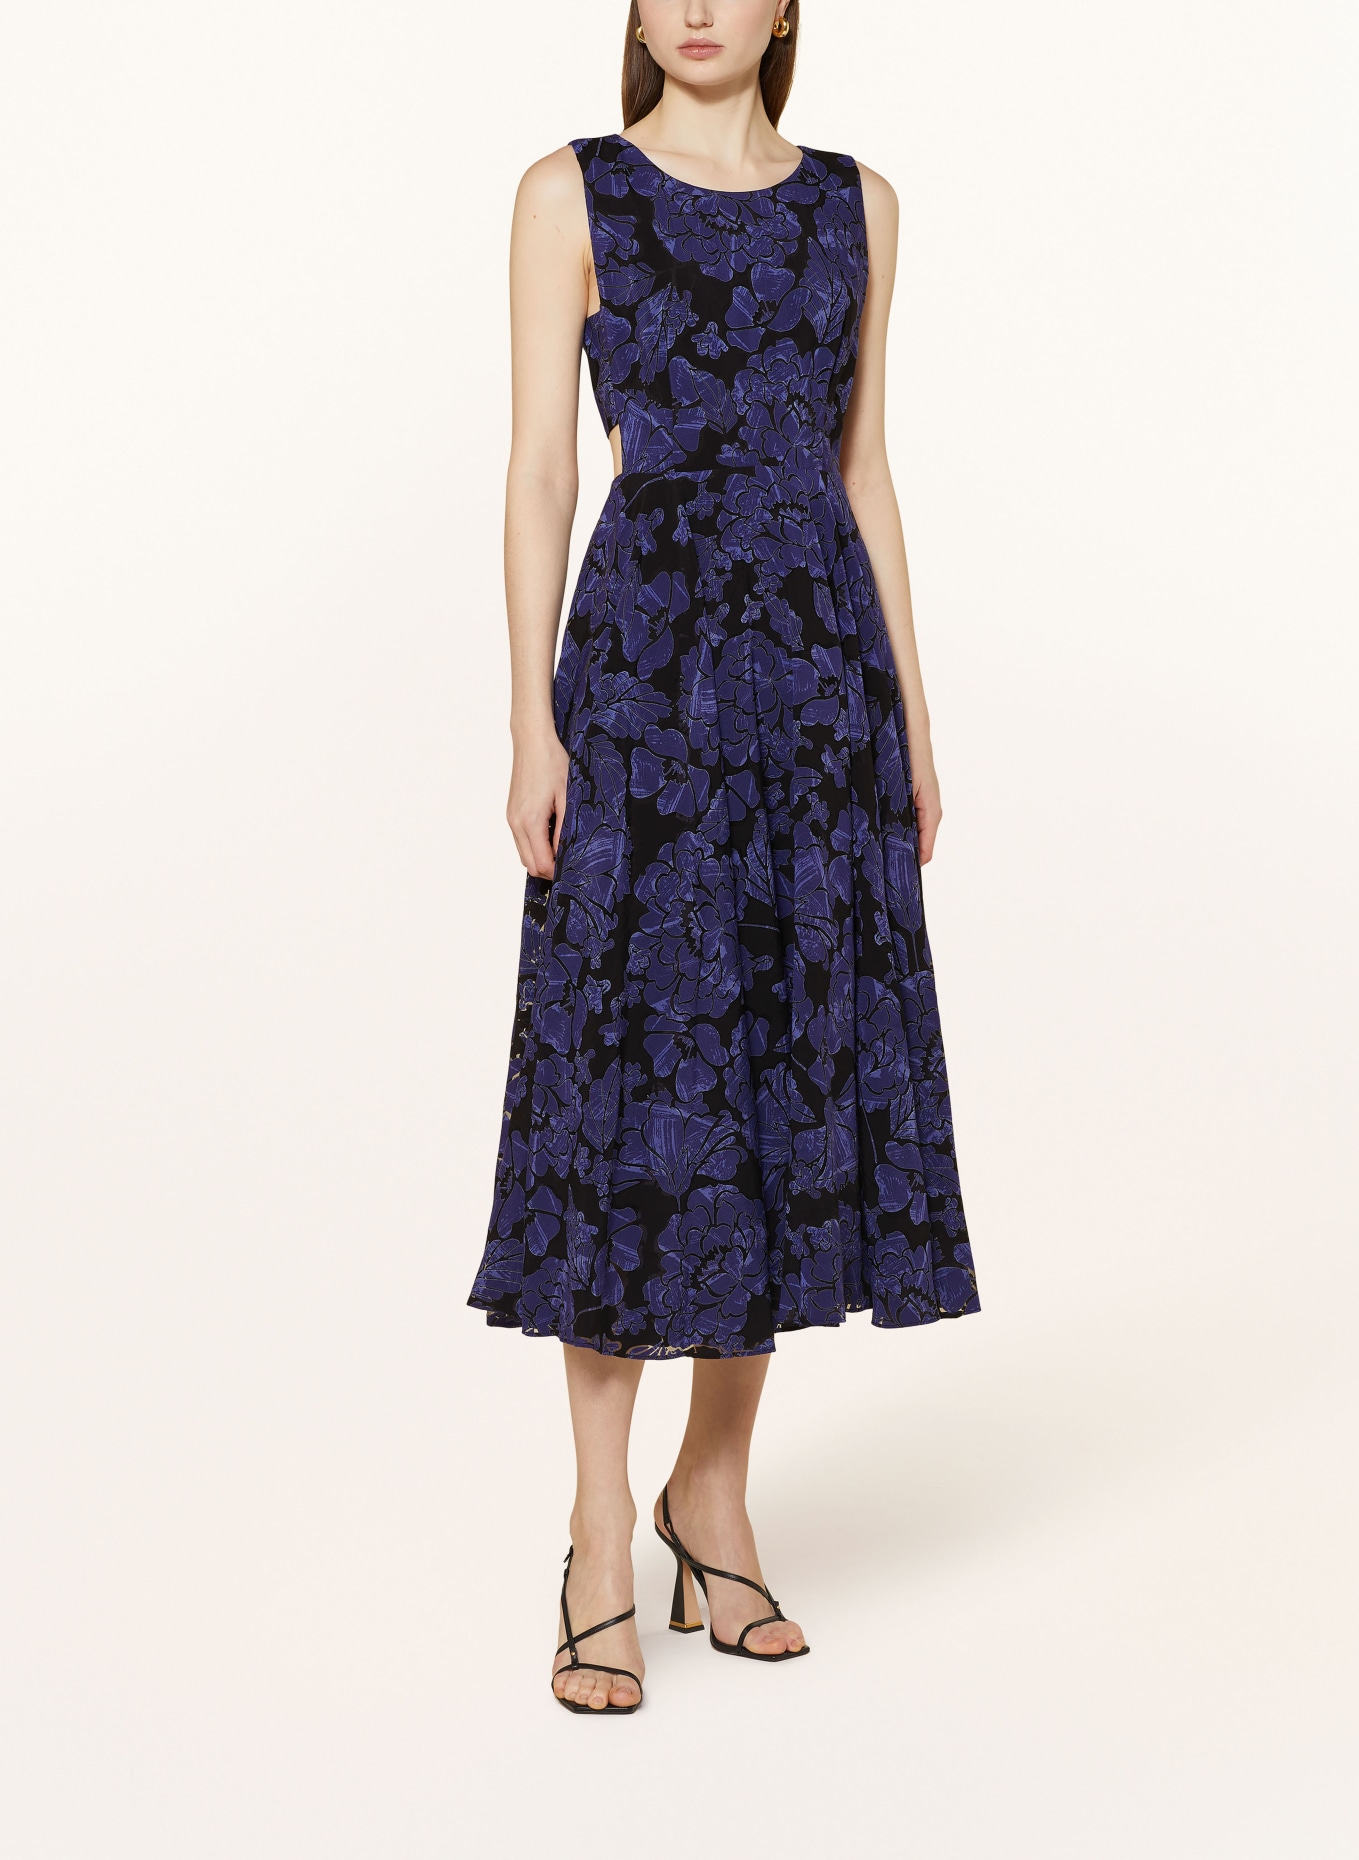 TED BAKER Dress OCCHITO with cut-out, Color: DARK BLUE/ BLACK (Image 2)